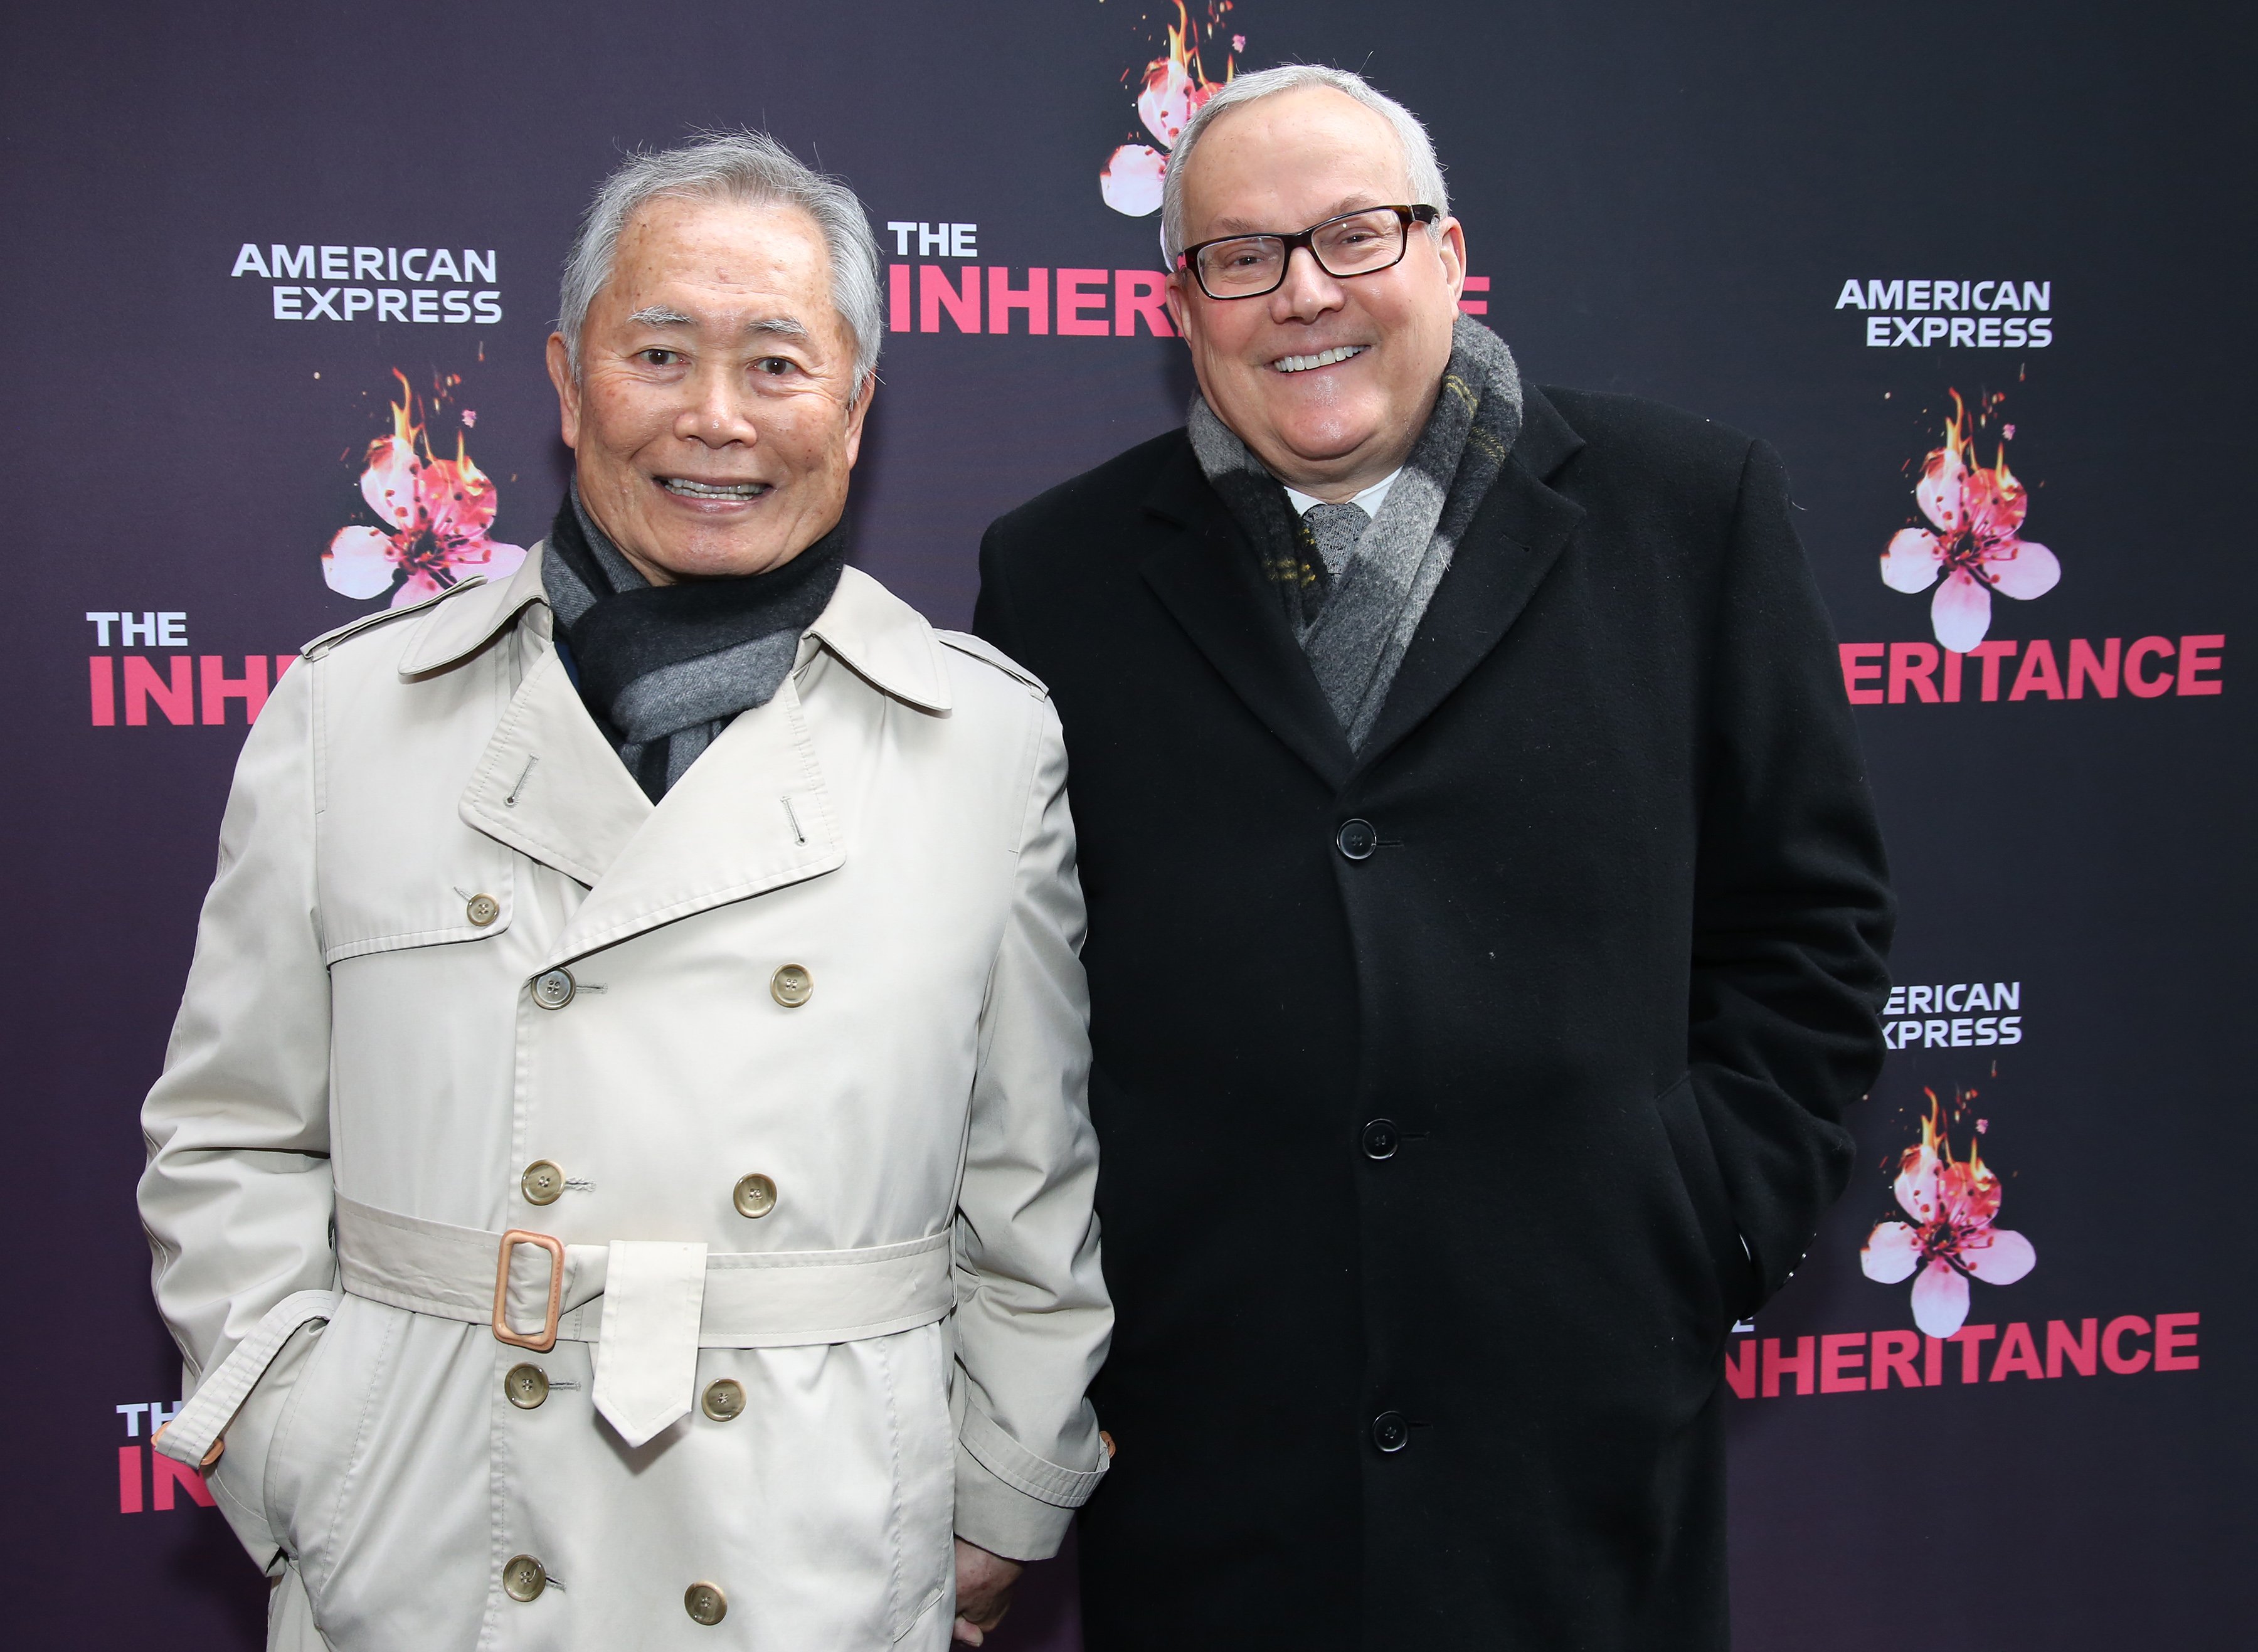 George Takei and Brad Altman at the New York opening night performance of "The Inheritance" on November 17, 2019 | Source: Getty Images